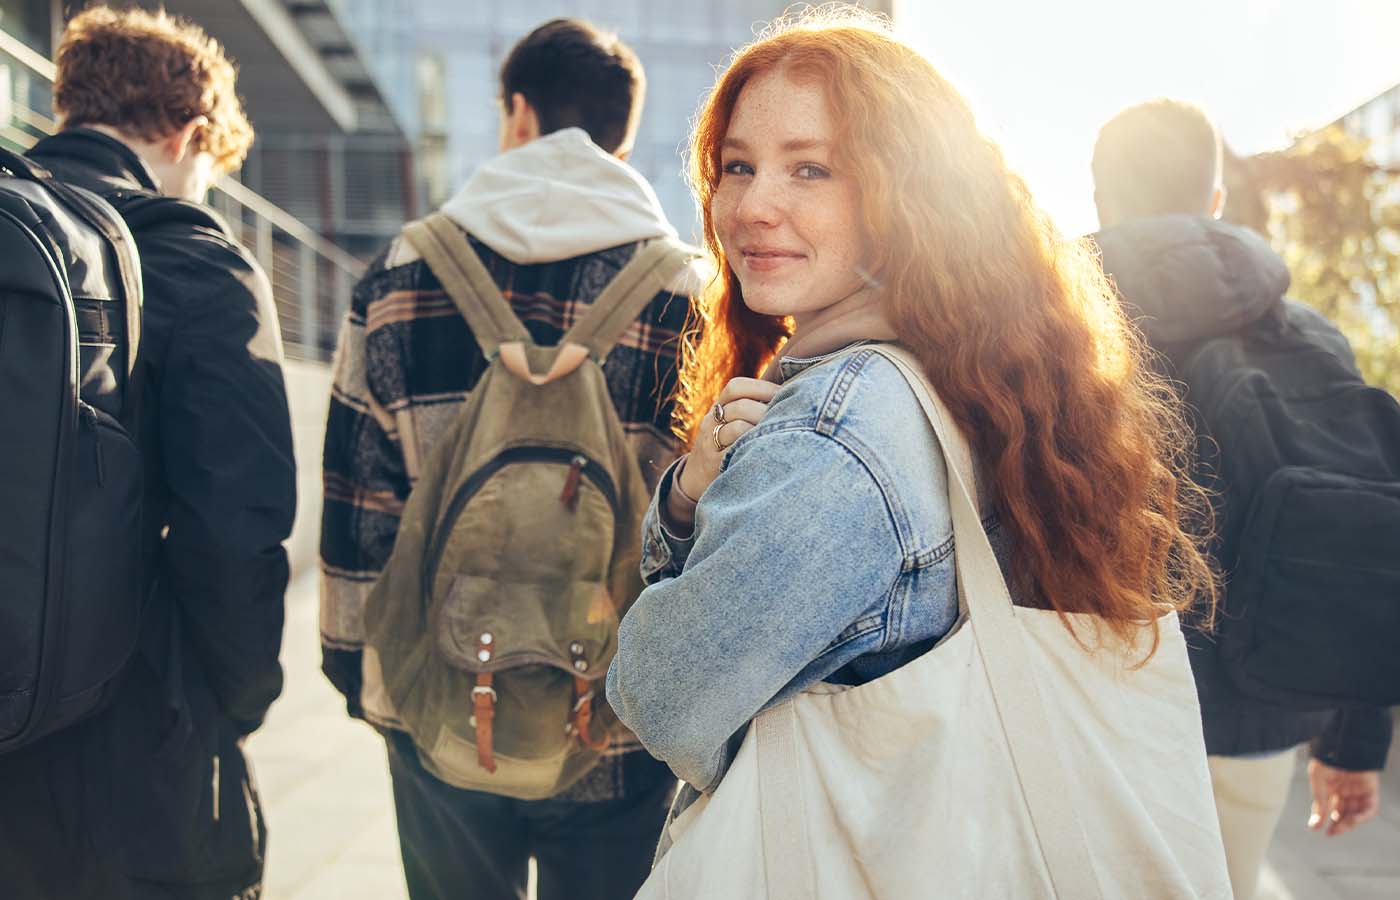 high school girl with red hair looking over her shoulder while walking toward class with a backpack on her shoulder